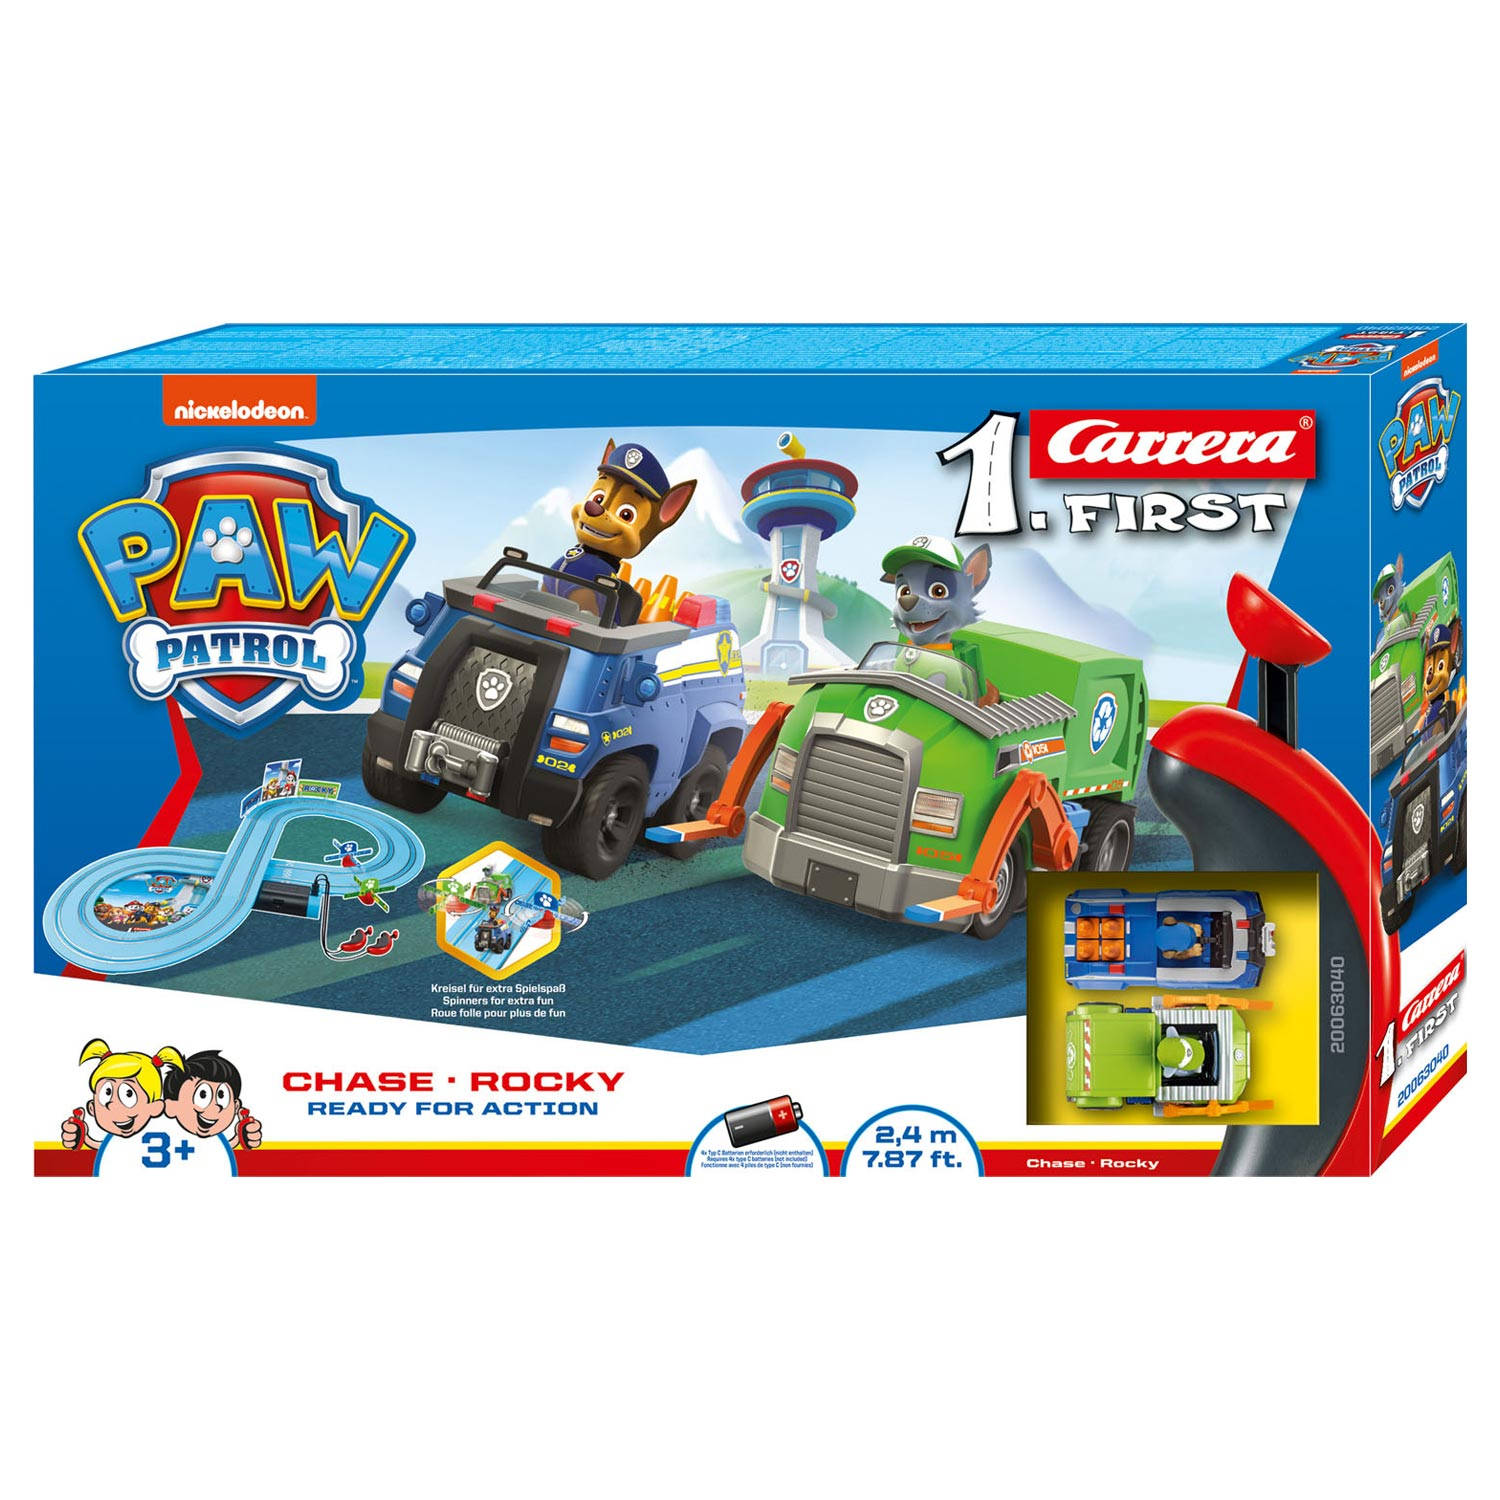 Carrera First 20063040 PAW Patrol Ready for Action Startset